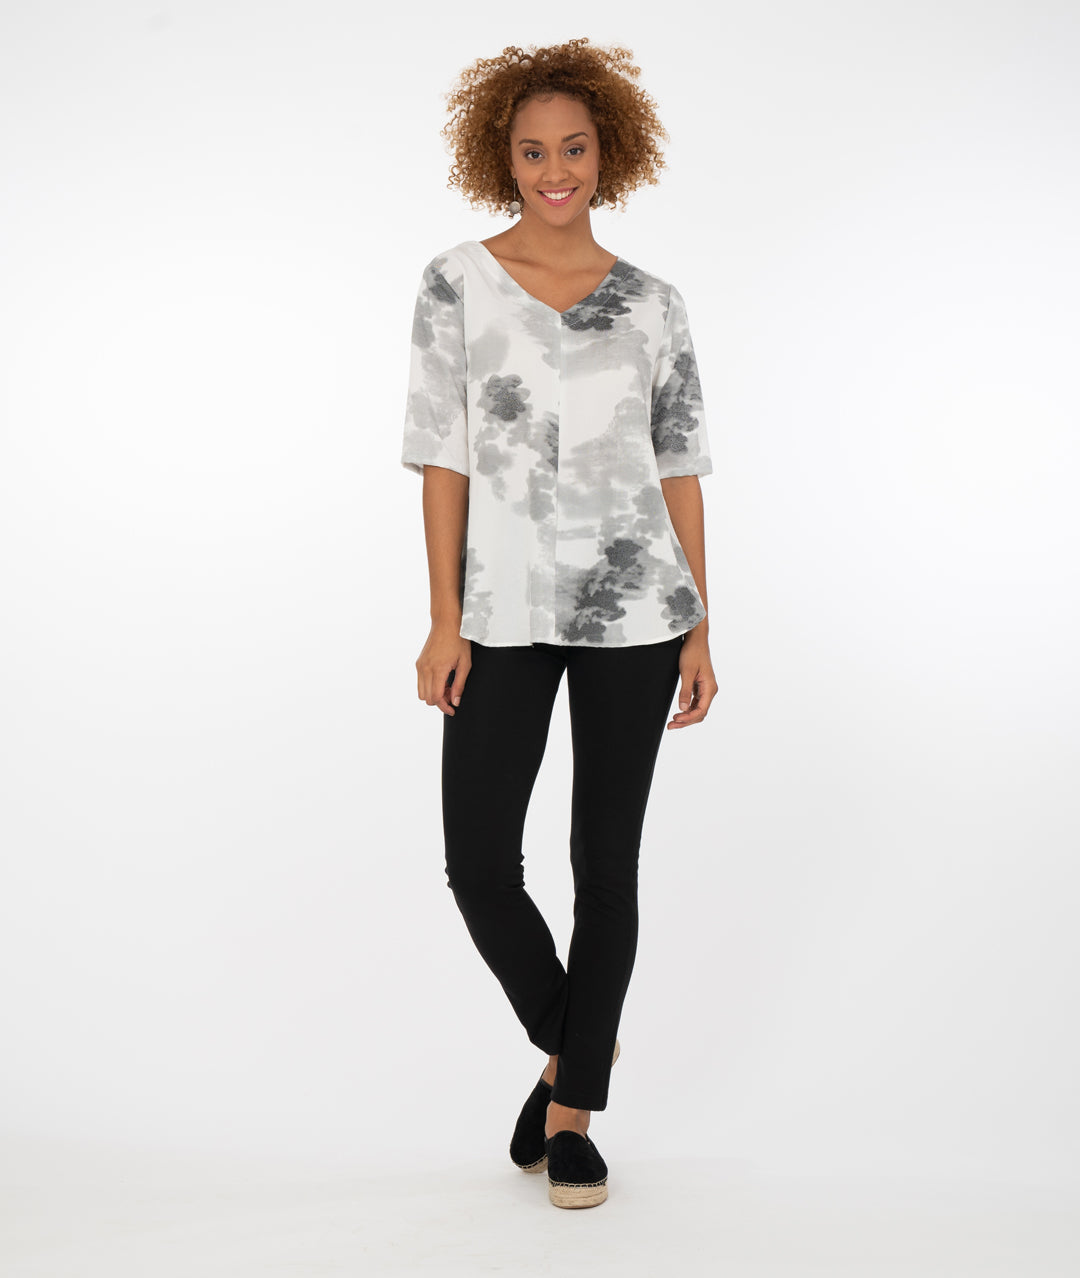 model in a black pant with a grey and white print vneck top